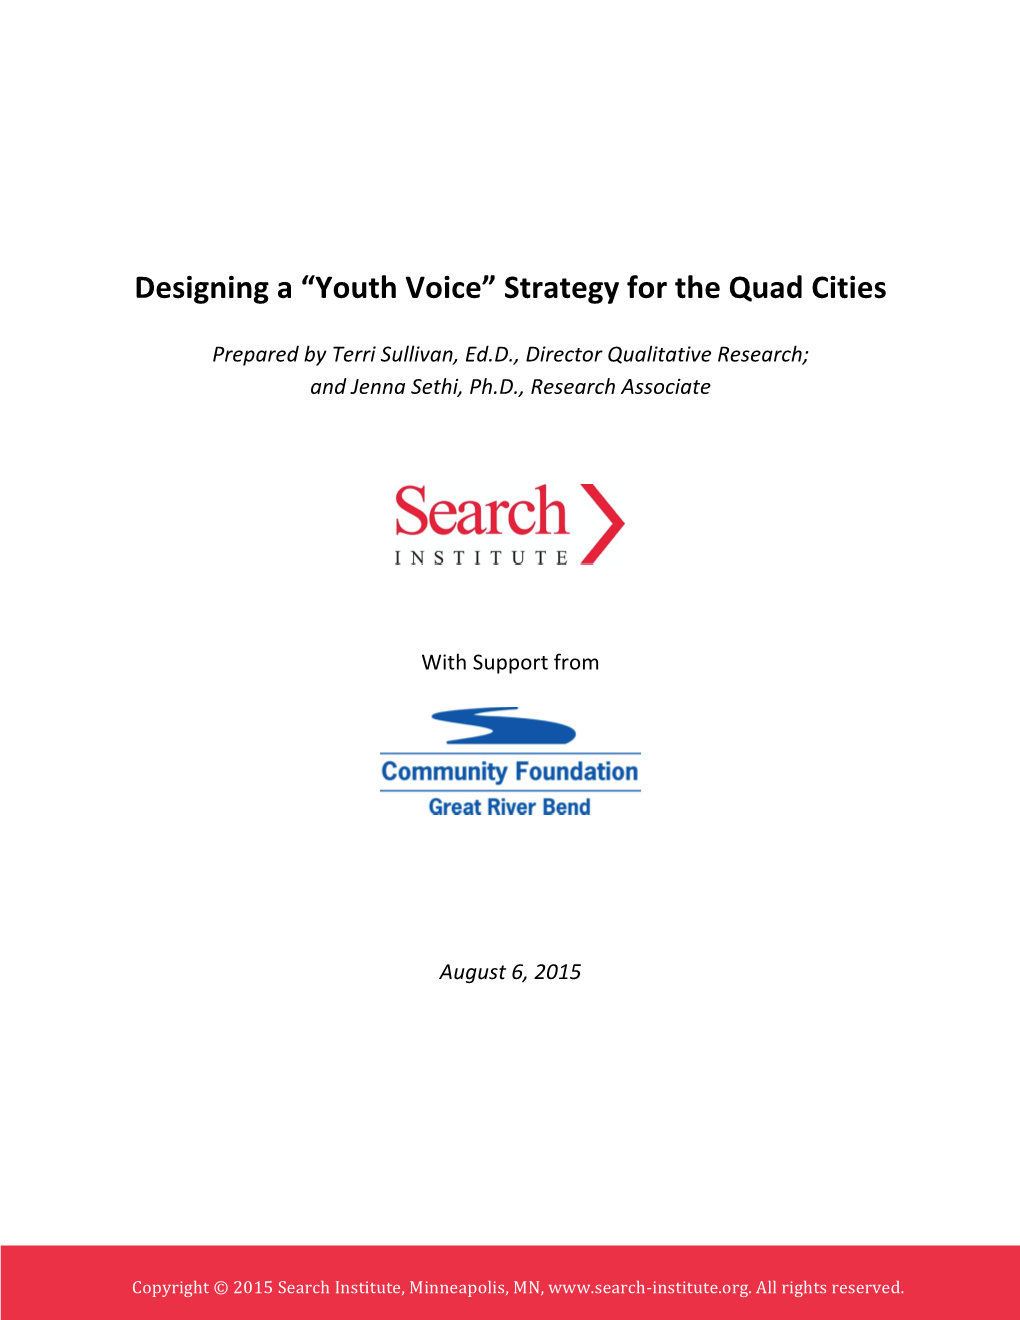 Quad Cities Youth Voice Strategy Report From